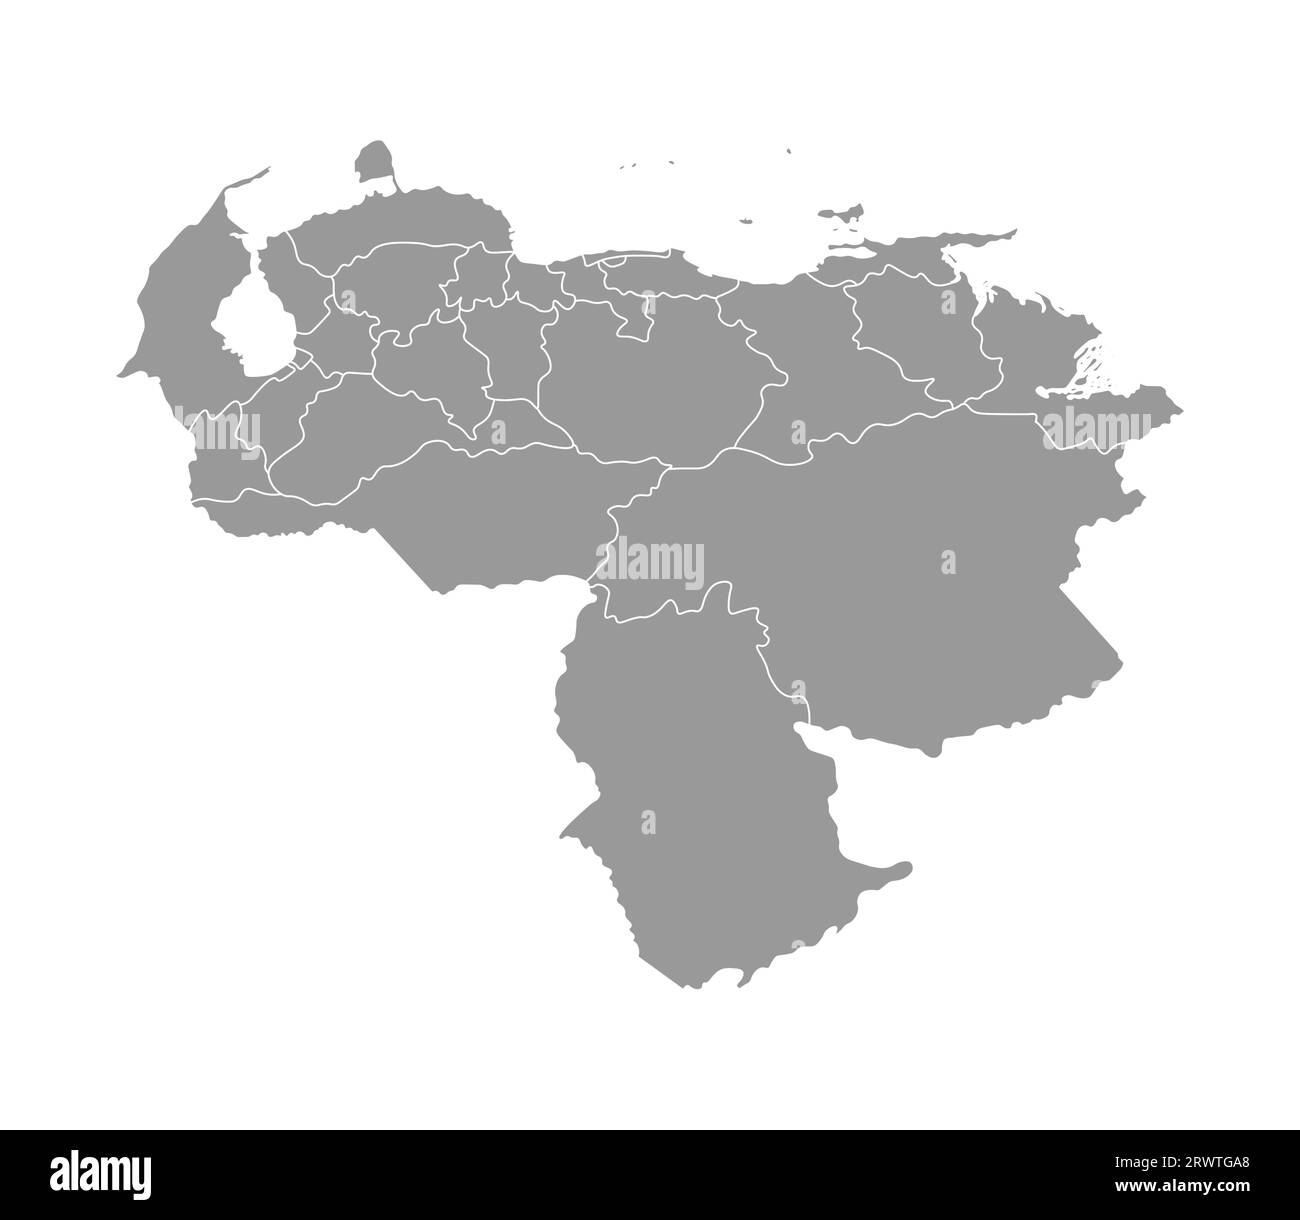 Vector isolated illustration of simplified administrative map of Venezuela. Borders of the provinces (regions). Grey silhouettes. White outline. Stock Vector